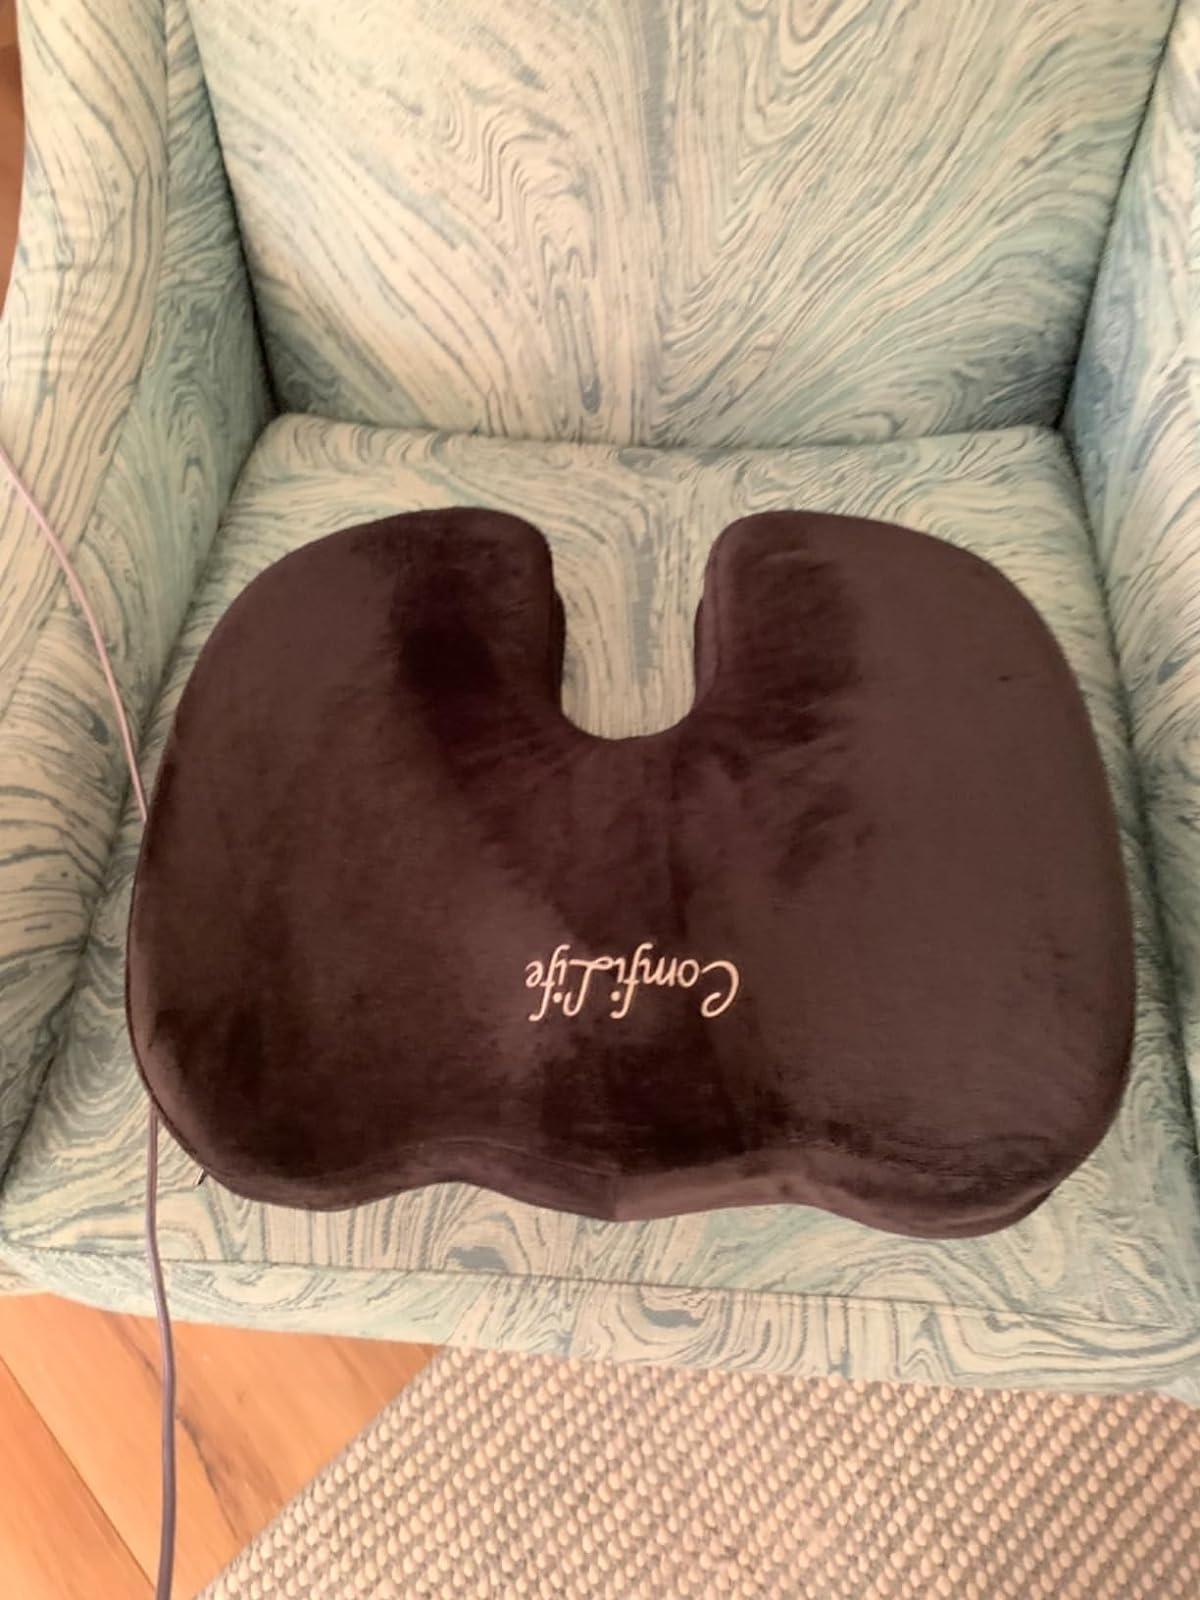 Reviewer image of the seat cushion on their armchair